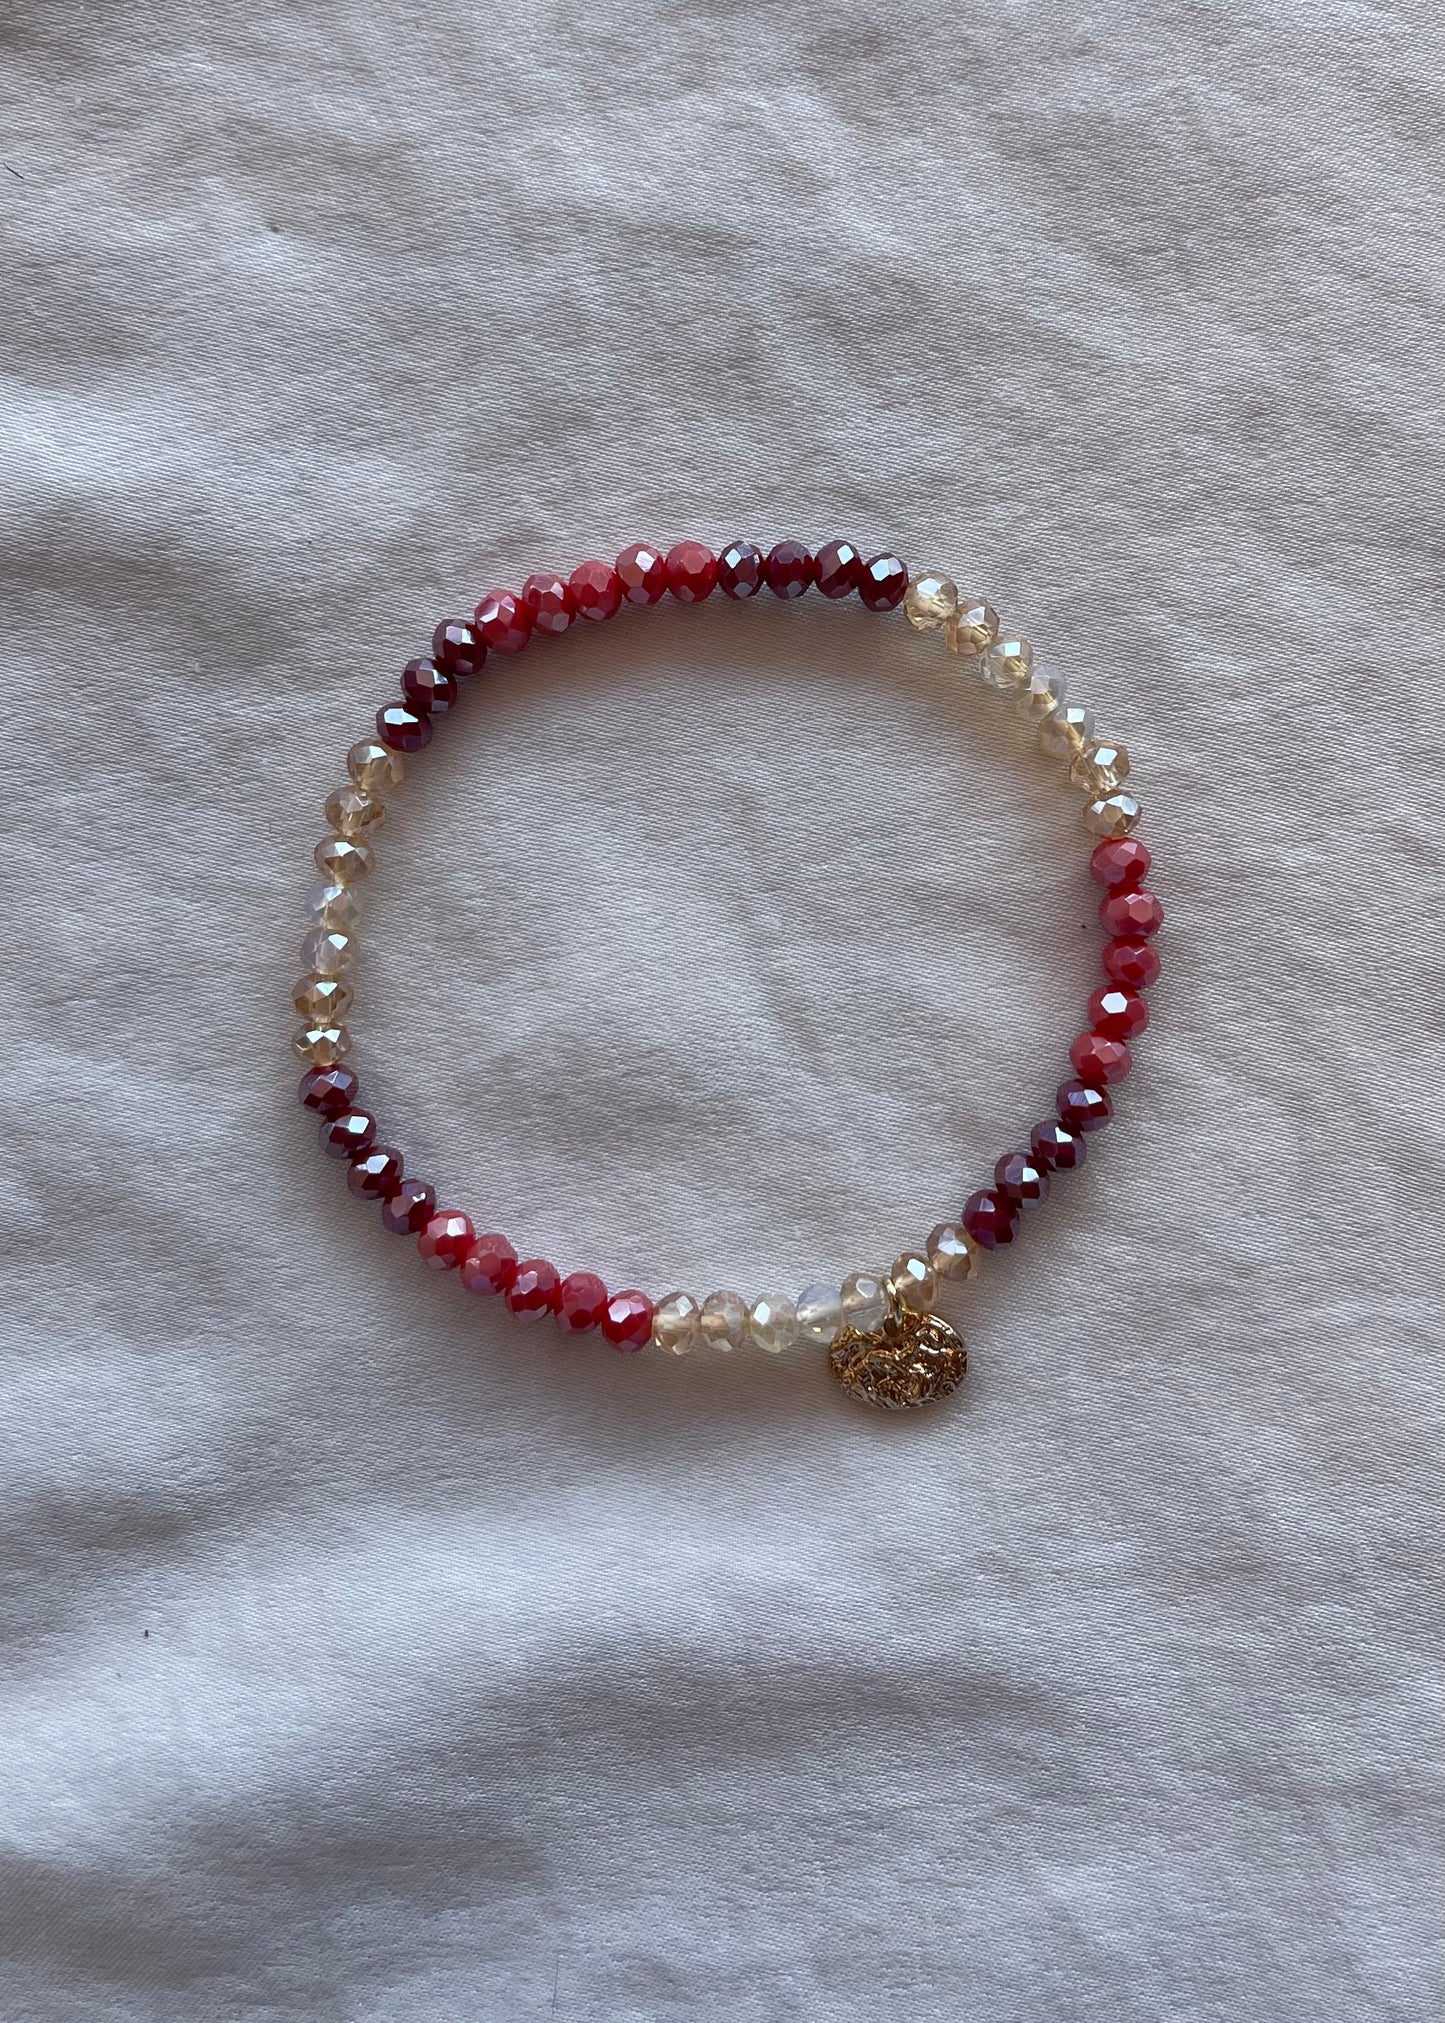 Fall Is In The Air Bracelet